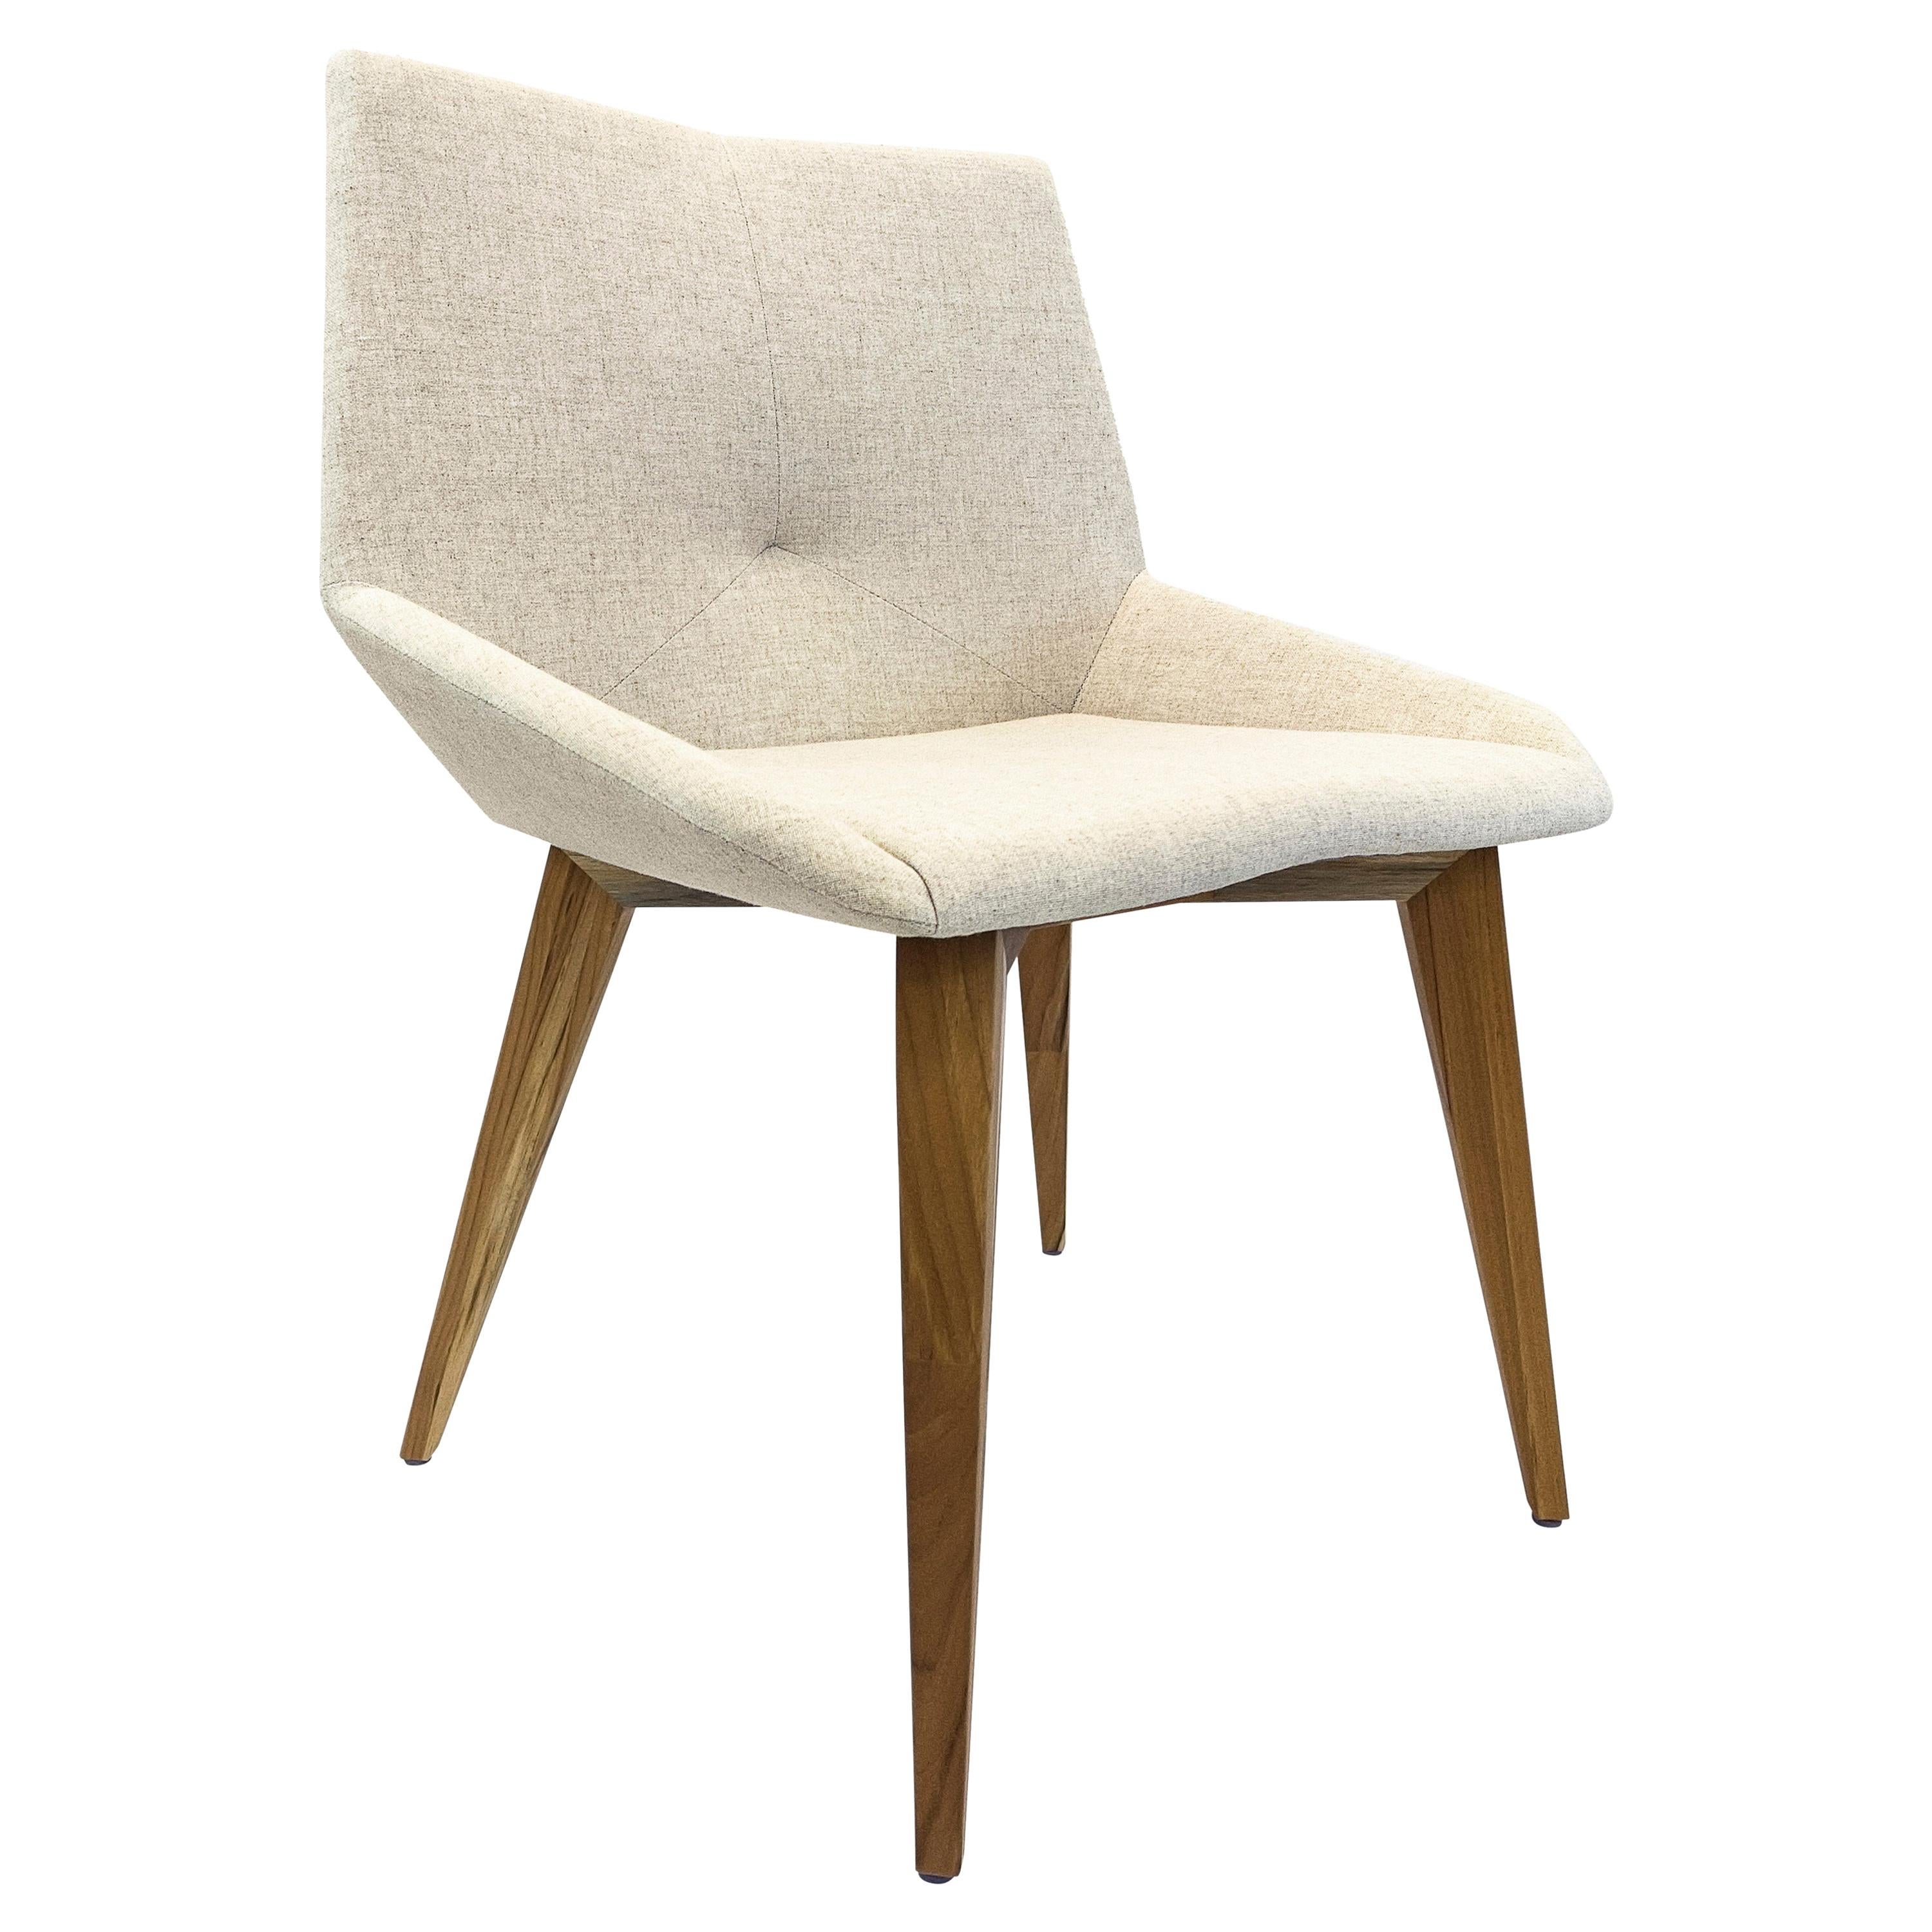 Geometric Cubi Dining Chair in Teak Wood Finish with Oatmeal Fabric Seat For Sale